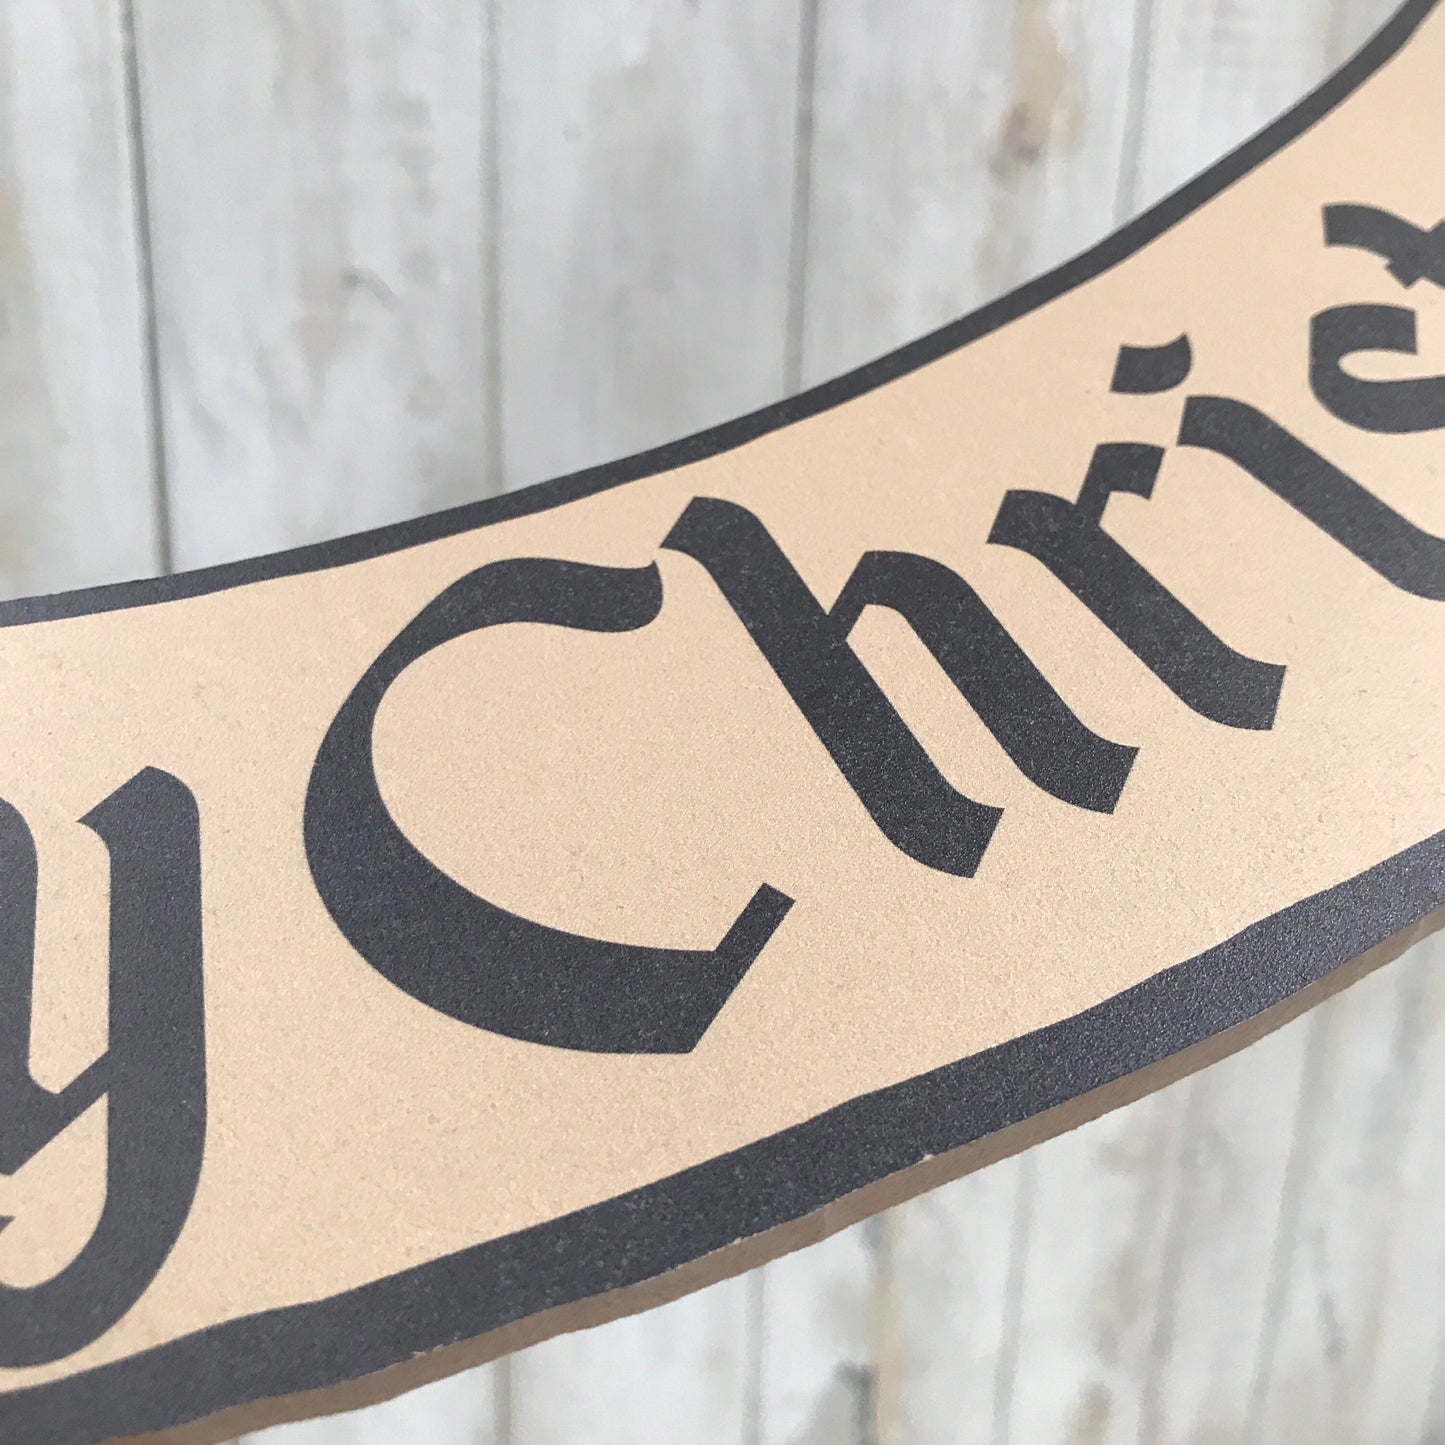 Rustic Merry Christmas Wooden Banner